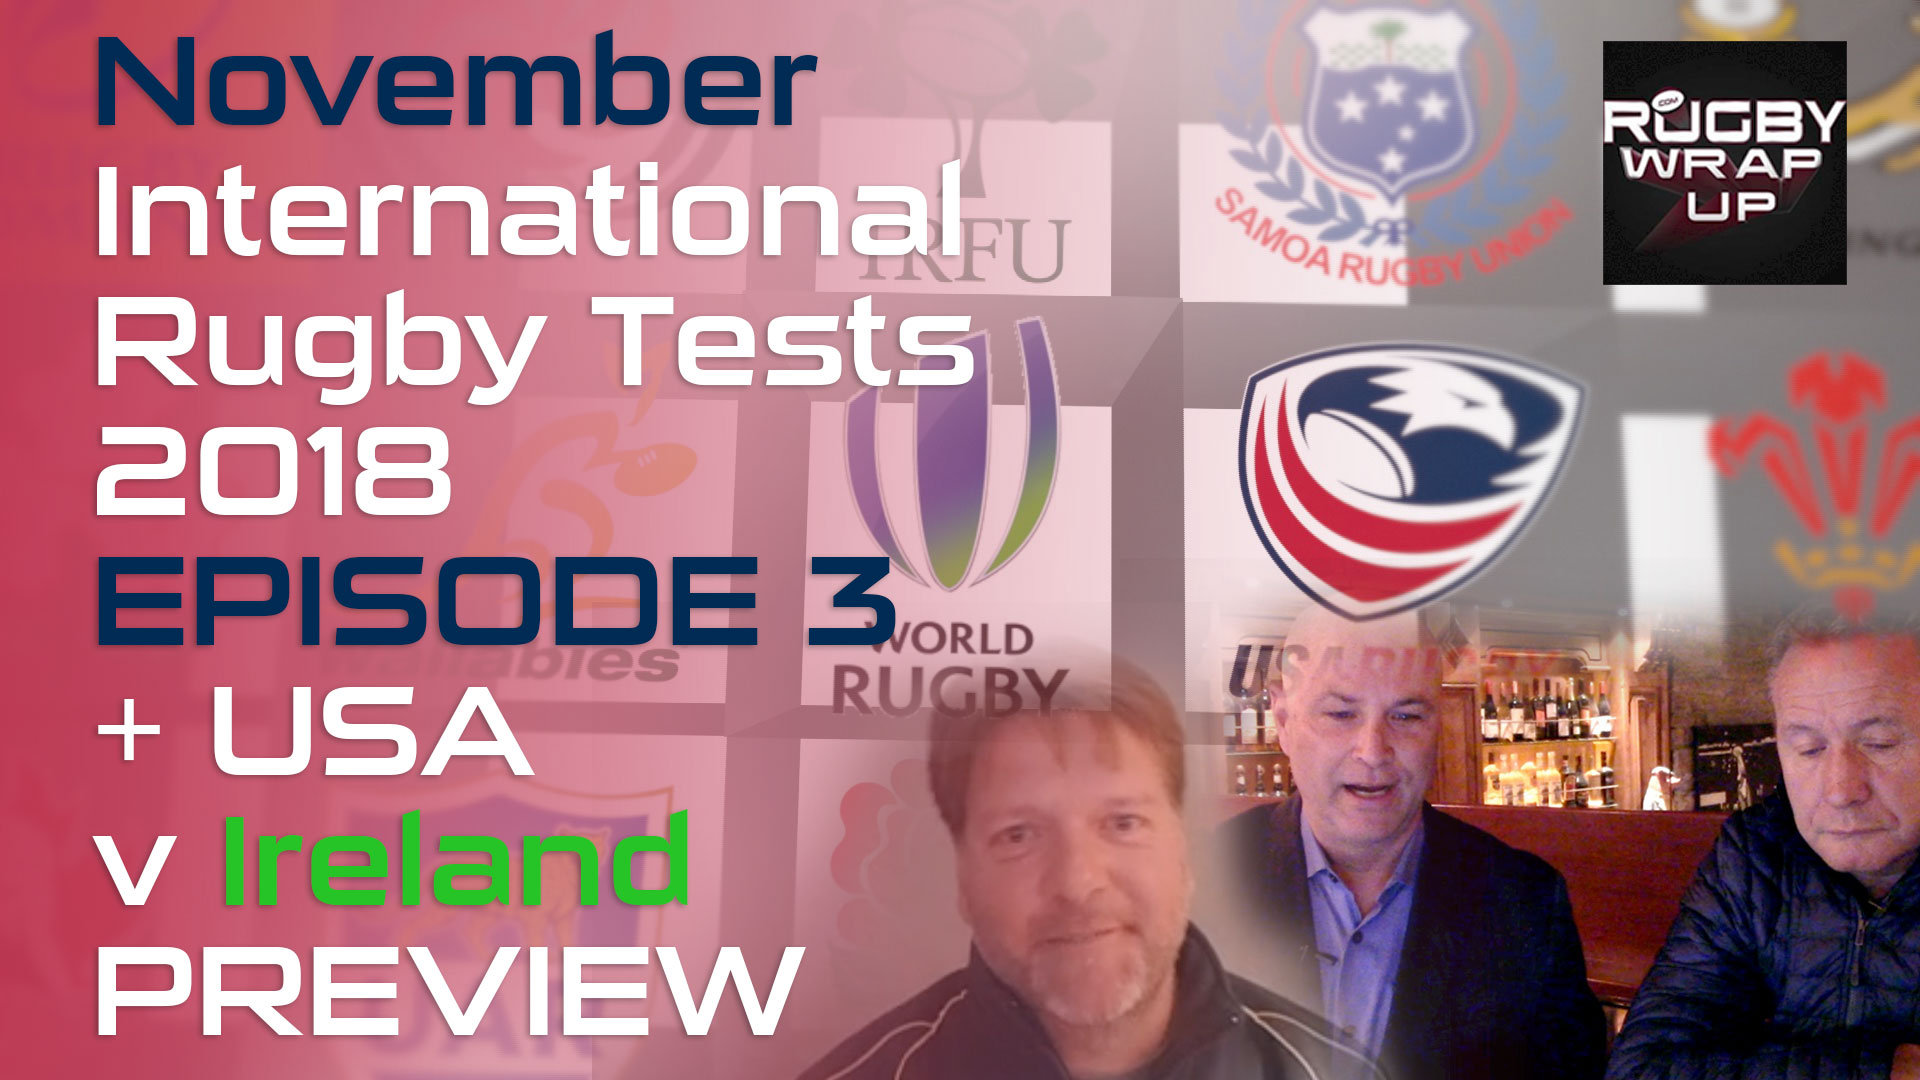 Rugby TV and Podcast: November Test Rugby Madness. Lewis, McCarthy, some guy Herbert Analyze, Banter, Bet